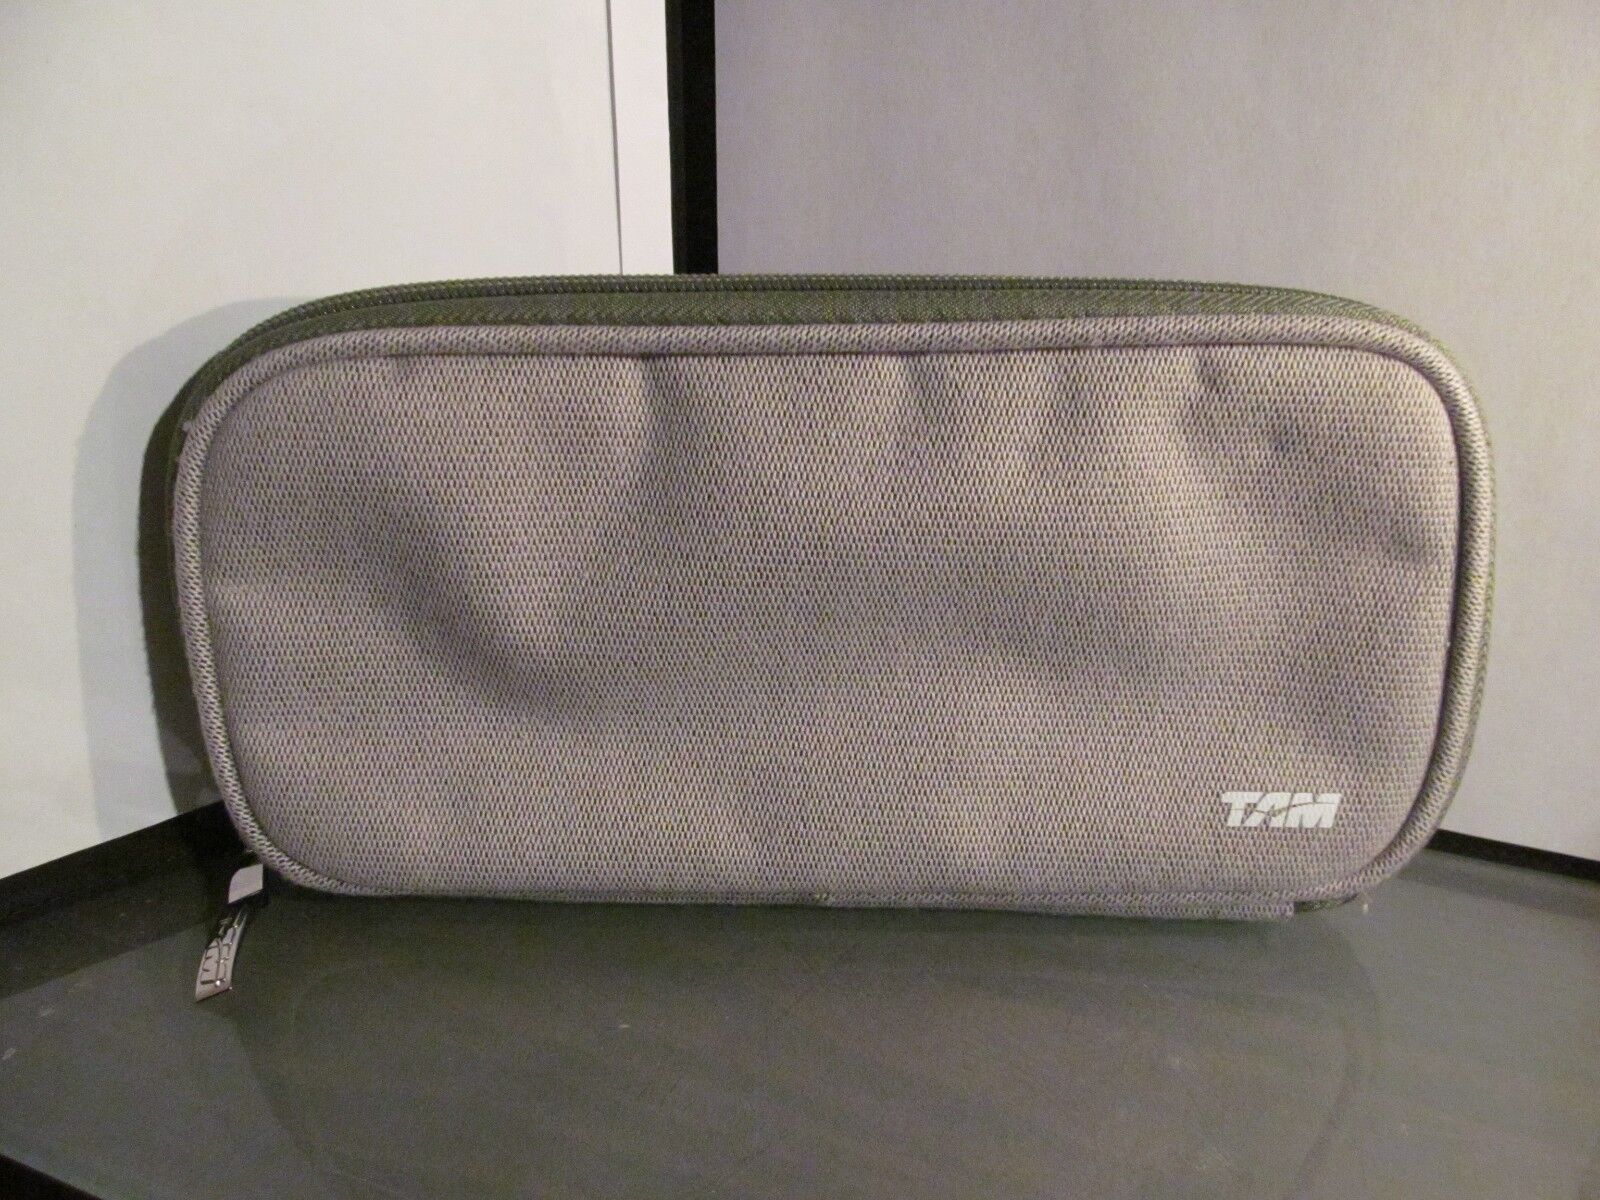 Tam Airlines Brazil Airline Amenity Bag Kit Cosmetic Travel Dopp Cord Case Green